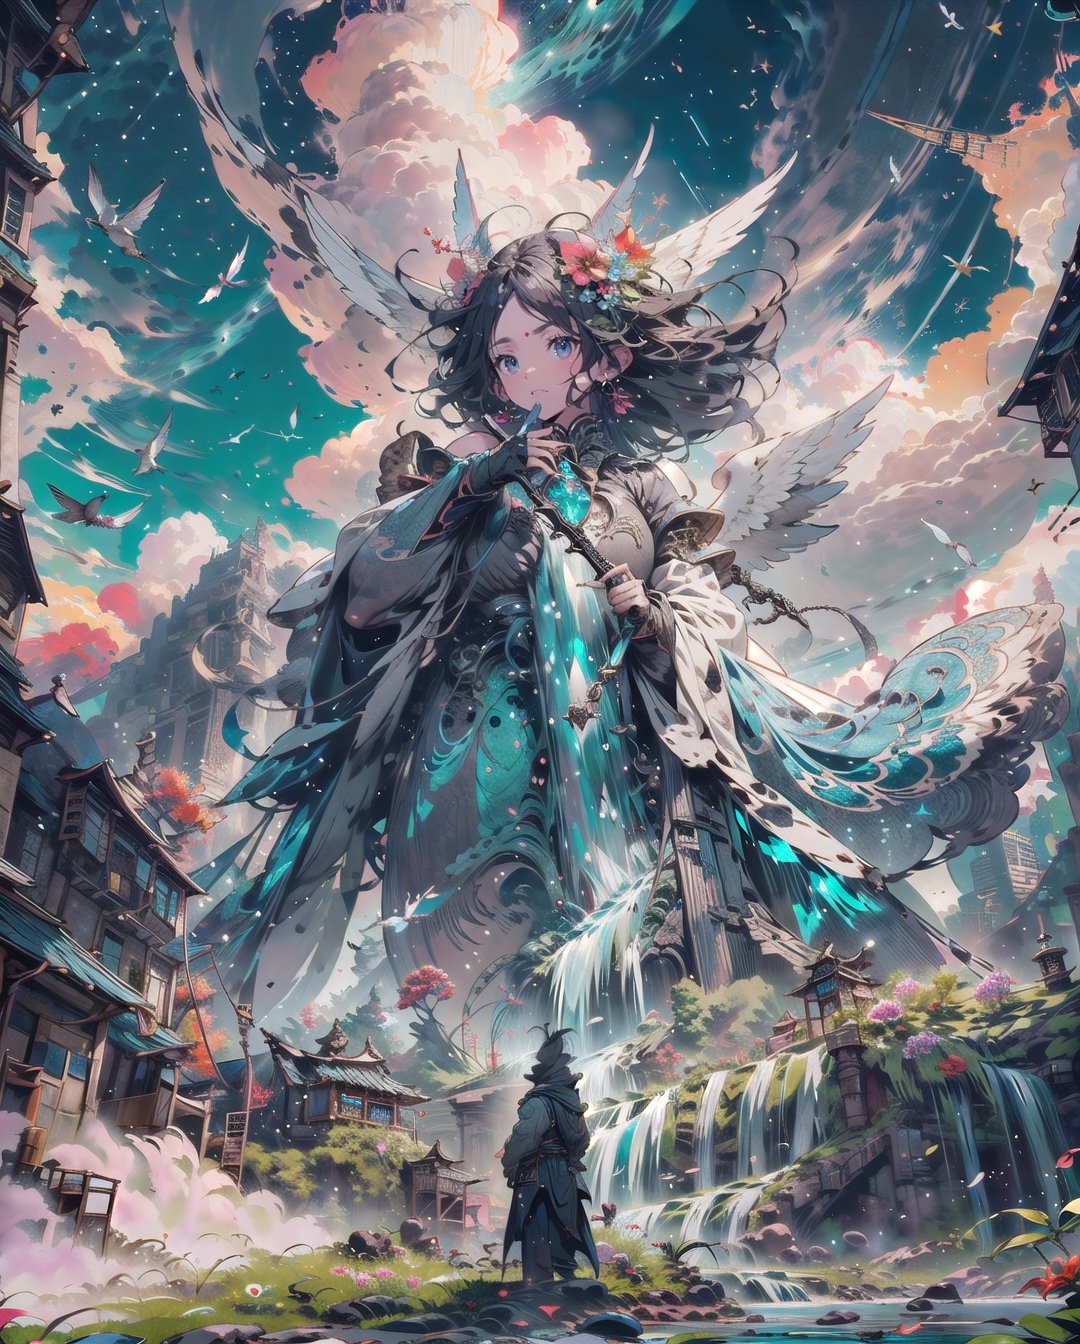 Huge angel,Medieval equipment, left man and right woman, knights (ensemble stars!),armor, wings, sky,white armor, cloud, outdoors, angel wings, bird,blend, medium shot, bokeh,outdoors, open grassland, symmetrical composition, low-angle shooting, zoom in, the most beautiful image I have ever seen, wide angle, distant view, looking up, combat scene, action_pose,Massive sandstone pyramid city, housing units, tropical landscape, tropical flowers, lush green grass. river, waterfall, hyper detailed 8k, unreal engine.